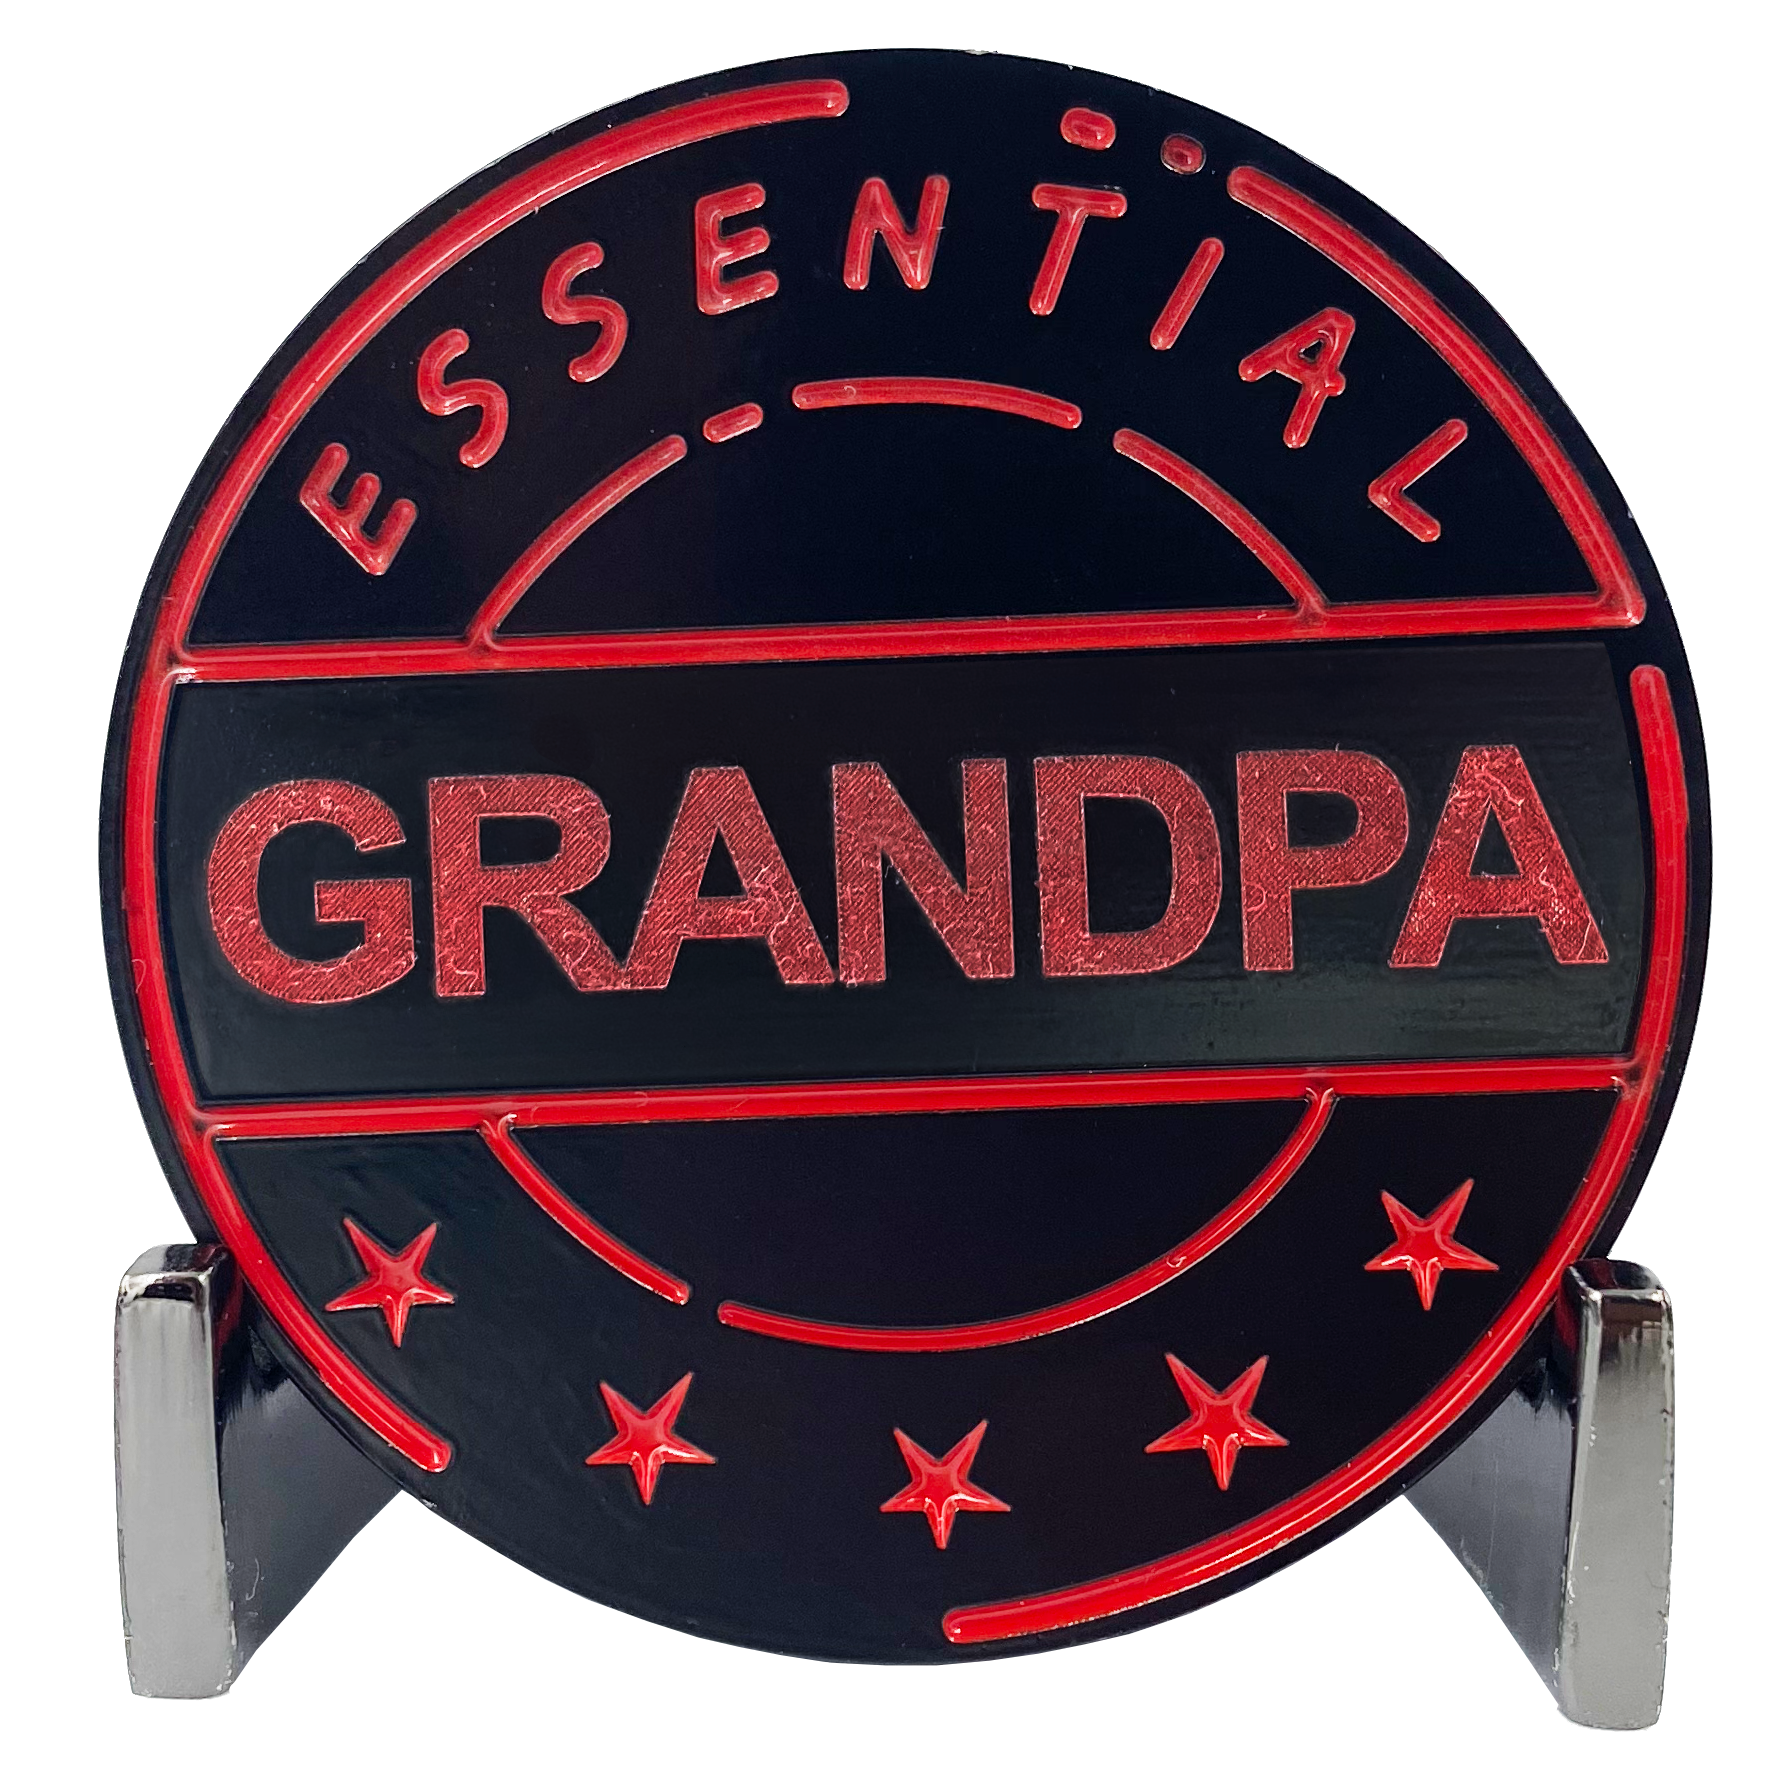 CL8-13 Essential Workers Grandpa Challenge Coin perfect for Father's Day or Grandfather's Birthday